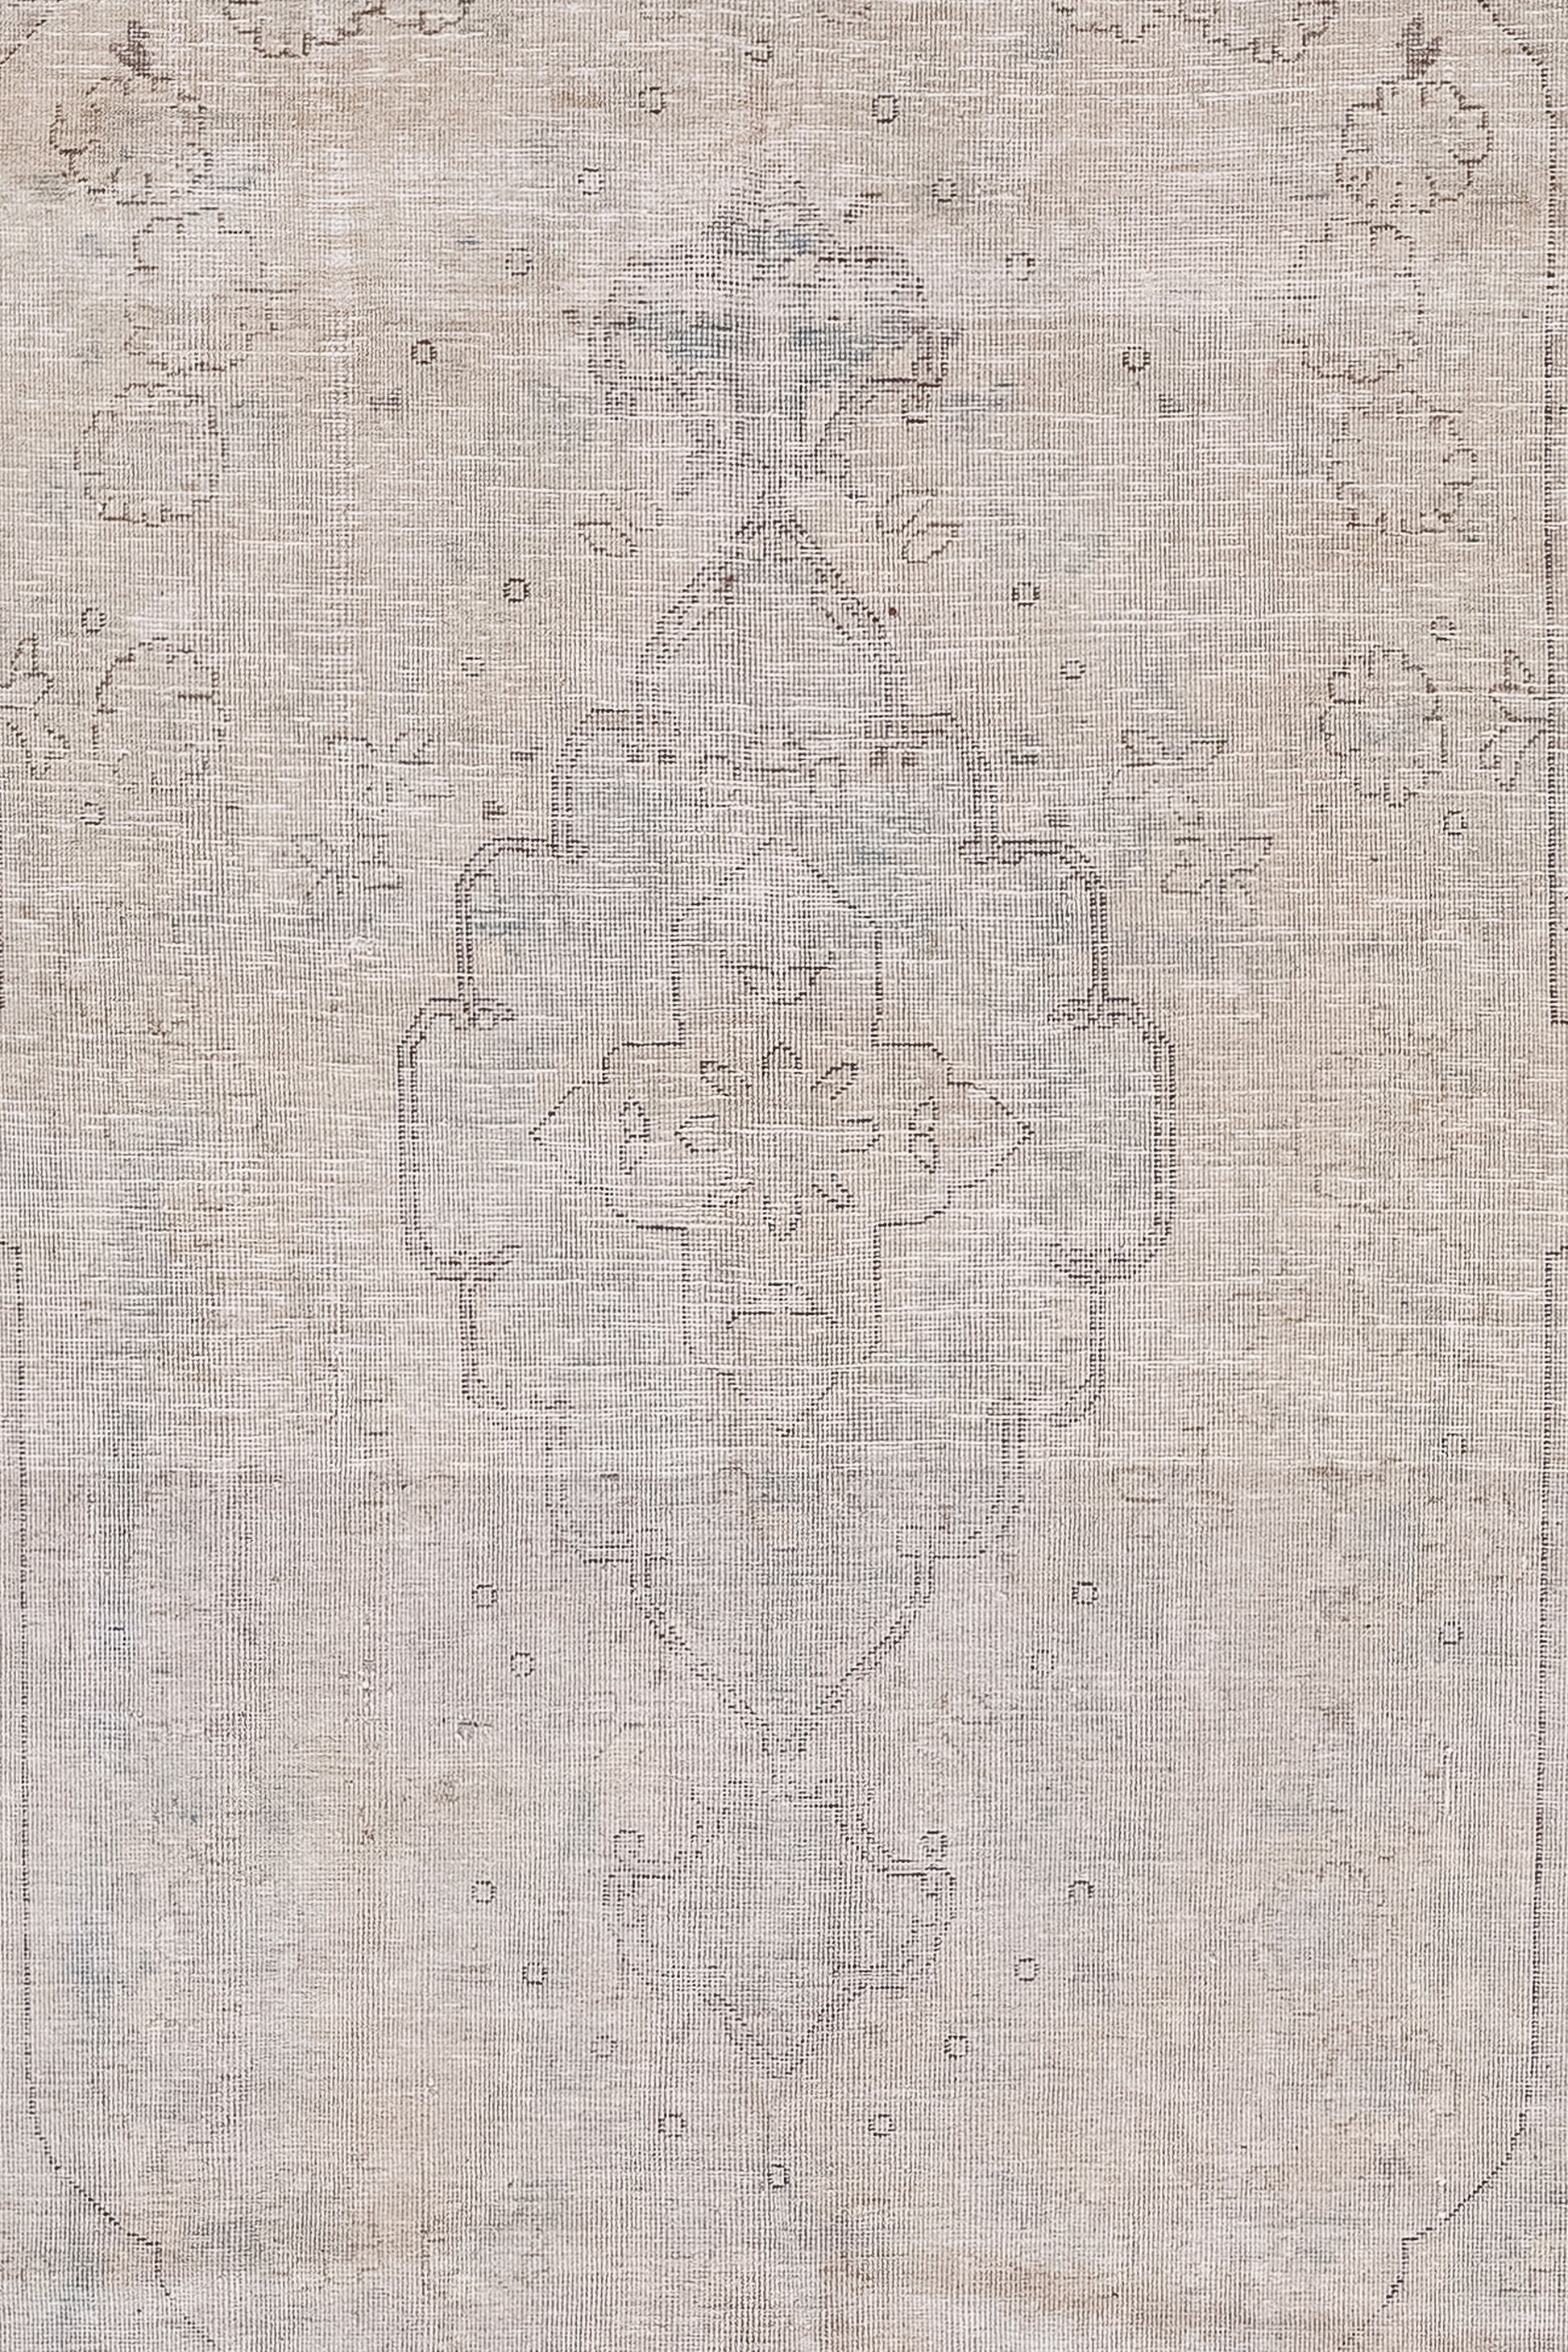 The center of the carpet features a diamond-shaped ornament that holds a cross in the middle. Additionally, this central ornament has two flying fleurs-de-lys at the top and bottom.